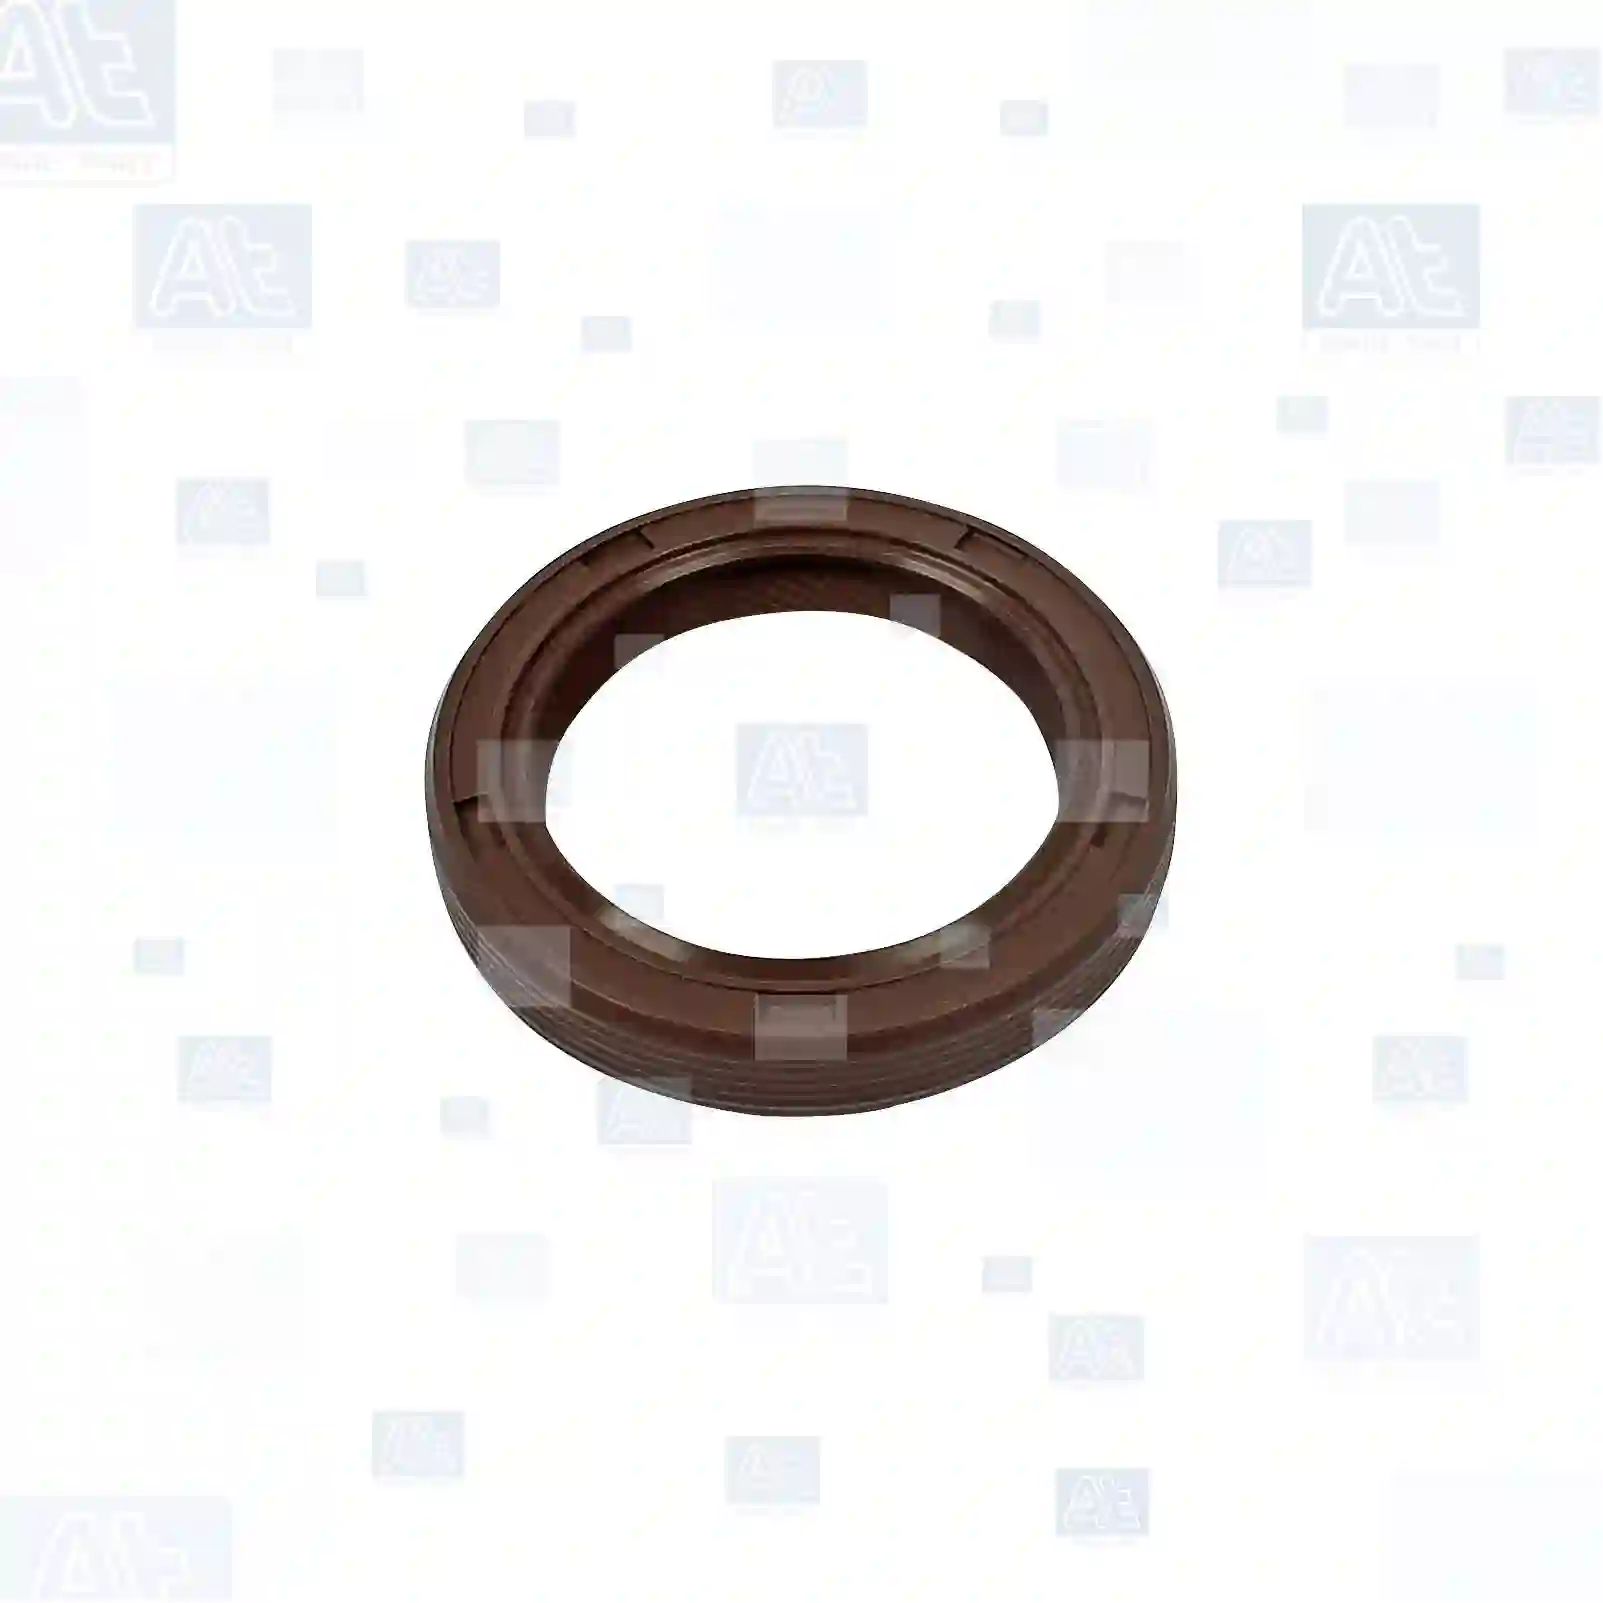 Oil seal, camshaft, 77701668, 55196124, 55196125, 60805718, 60809849, 71753052, 23111228314, 07604177, 55196124, 55196125, 60805718, 60809849, 71753052, 9111521, 9201464, 93178530, 22144-35504, 22144-39000, 22144-39001, 07604177, 07604178, 55196124, 55196125, 60805718, 60809849, 71753052, 4403521, 4506052, 649967, 7700743160, 7700747291, 7700749395, 93178530, 12746-79J50 ||  77701668 At Spare Part | Engine, Accelerator Pedal, Camshaft, Connecting Rod, Crankcase, Crankshaft, Cylinder Head, Engine Suspension Mountings, Exhaust Manifold, Exhaust Gas Recirculation, Filter Kits, Flywheel Housing, General Overhaul Kits, Engine, Intake Manifold, Oil Cleaner, Oil Cooler, Oil Filter, Oil Pump, Oil Sump, Piston & Liner, Sensor & Switch, Timing Case, Turbocharger, Cooling System, Belt Tensioner, Coolant Filter, Coolant Pipe, Corrosion Prevention Agent, Drive, Expansion Tank, Fan, Intercooler, Monitors & Gauges, Radiator, Thermostat, V-Belt / Timing belt, Water Pump, Fuel System, Electronical Injector Unit, Feed Pump, Fuel Filter, cpl., Fuel Gauge Sender,  Fuel Line, Fuel Pump, Fuel Tank, Injection Line Kit, Injection Pump, Exhaust System, Clutch & Pedal, Gearbox, Propeller Shaft, Axles, Brake System, Hubs & Wheels, Suspension, Leaf Spring, Universal Parts / Accessories, Steering, Electrical System, Cabin Oil seal, camshaft, 77701668, 55196124, 55196125, 60805718, 60809849, 71753052, 23111228314, 07604177, 55196124, 55196125, 60805718, 60809849, 71753052, 9111521, 9201464, 93178530, 22144-35504, 22144-39000, 22144-39001, 07604177, 07604178, 55196124, 55196125, 60805718, 60809849, 71753052, 4403521, 4506052, 649967, 7700743160, 7700747291, 7700749395, 93178530, 12746-79J50 ||  77701668 At Spare Part | Engine, Accelerator Pedal, Camshaft, Connecting Rod, Crankcase, Crankshaft, Cylinder Head, Engine Suspension Mountings, Exhaust Manifold, Exhaust Gas Recirculation, Filter Kits, Flywheel Housing, General Overhaul Kits, Engine, Intake Manifold, Oil Cleaner, Oil Cooler, Oil Filter, Oil Pump, Oil Sump, Piston & Liner, Sensor & Switch, Timing Case, Turbocharger, Cooling System, Belt Tensioner, Coolant Filter, Coolant Pipe, Corrosion Prevention Agent, Drive, Expansion Tank, Fan, Intercooler, Monitors & Gauges, Radiator, Thermostat, V-Belt / Timing belt, Water Pump, Fuel System, Electronical Injector Unit, Feed Pump, Fuel Filter, cpl., Fuel Gauge Sender,  Fuel Line, Fuel Pump, Fuel Tank, Injection Line Kit, Injection Pump, Exhaust System, Clutch & Pedal, Gearbox, Propeller Shaft, Axles, Brake System, Hubs & Wheels, Suspension, Leaf Spring, Universal Parts / Accessories, Steering, Electrical System, Cabin